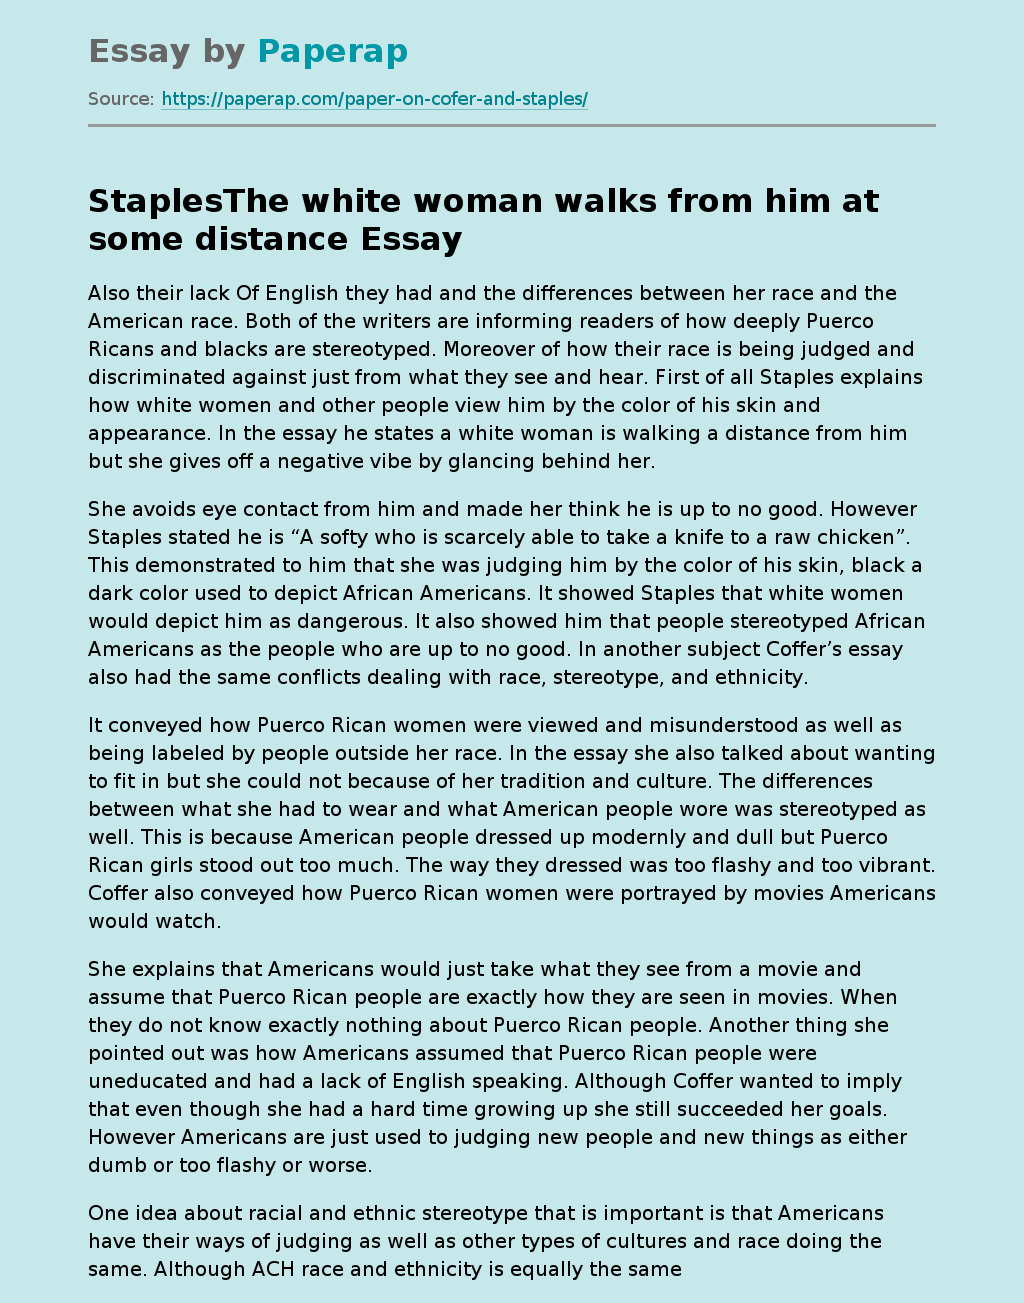 StaplesThe white woman walks from him at some distance